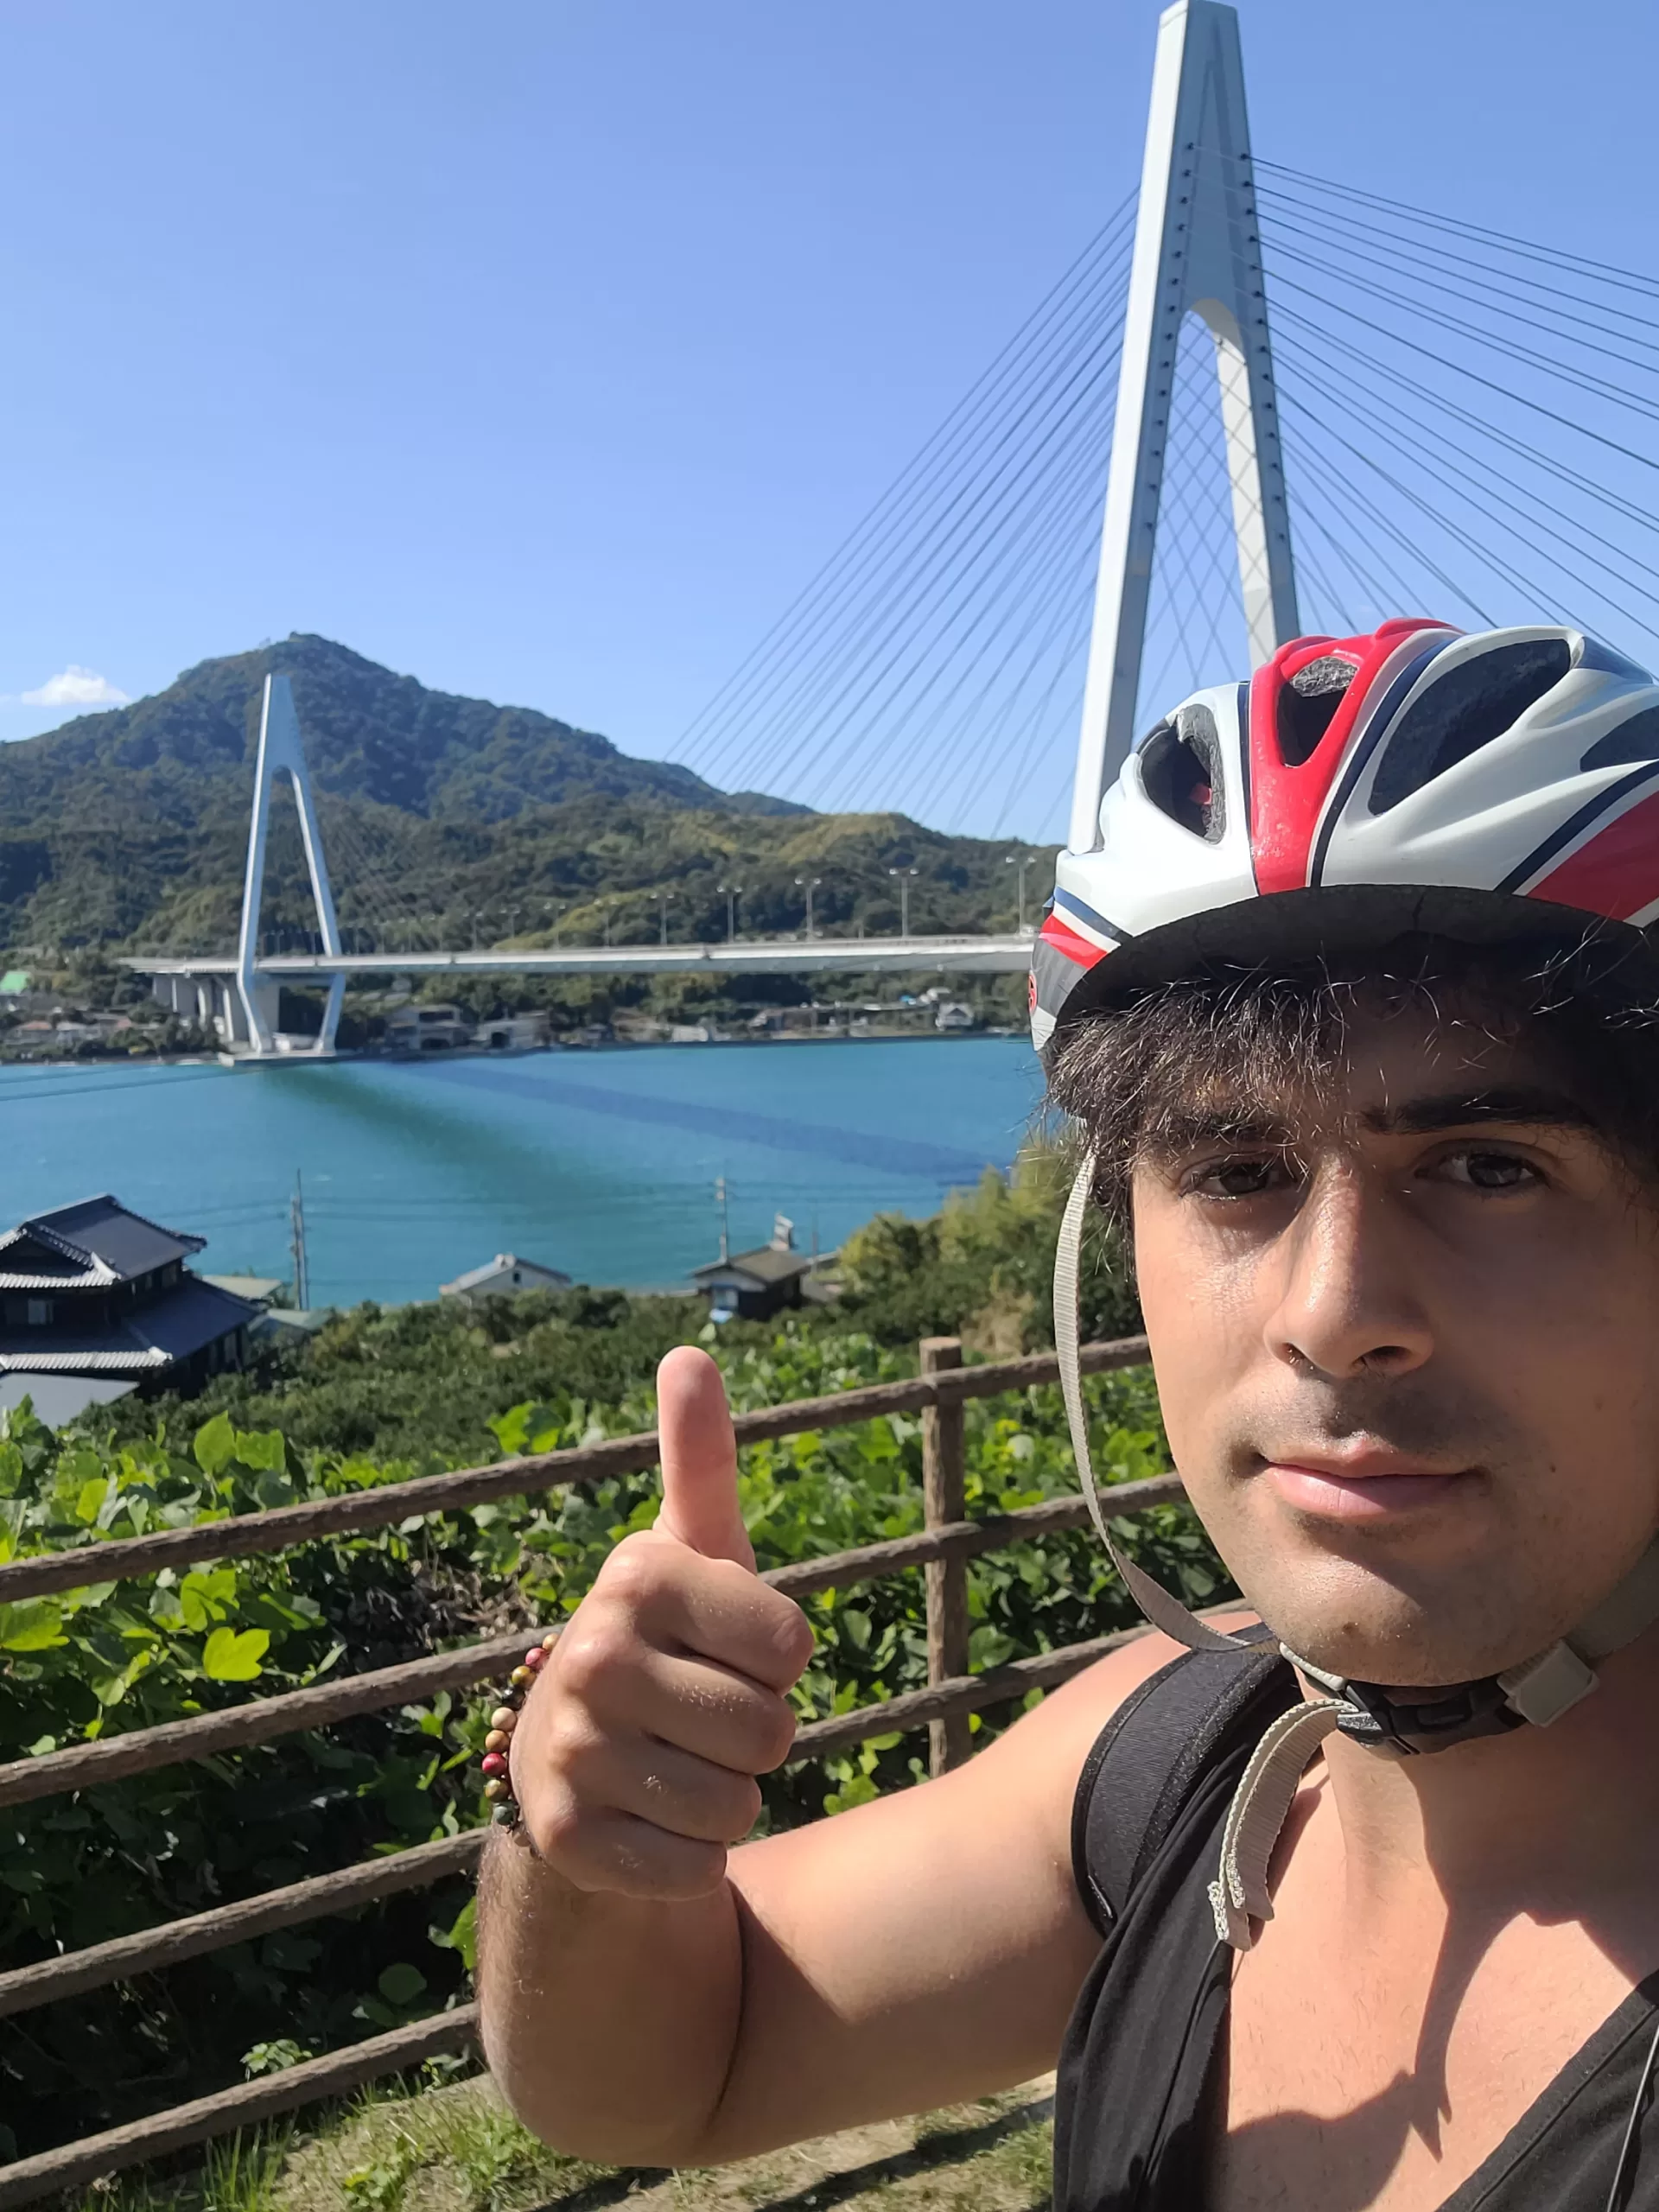 Shimanami Kaido is the best cycling route I’ve ever done